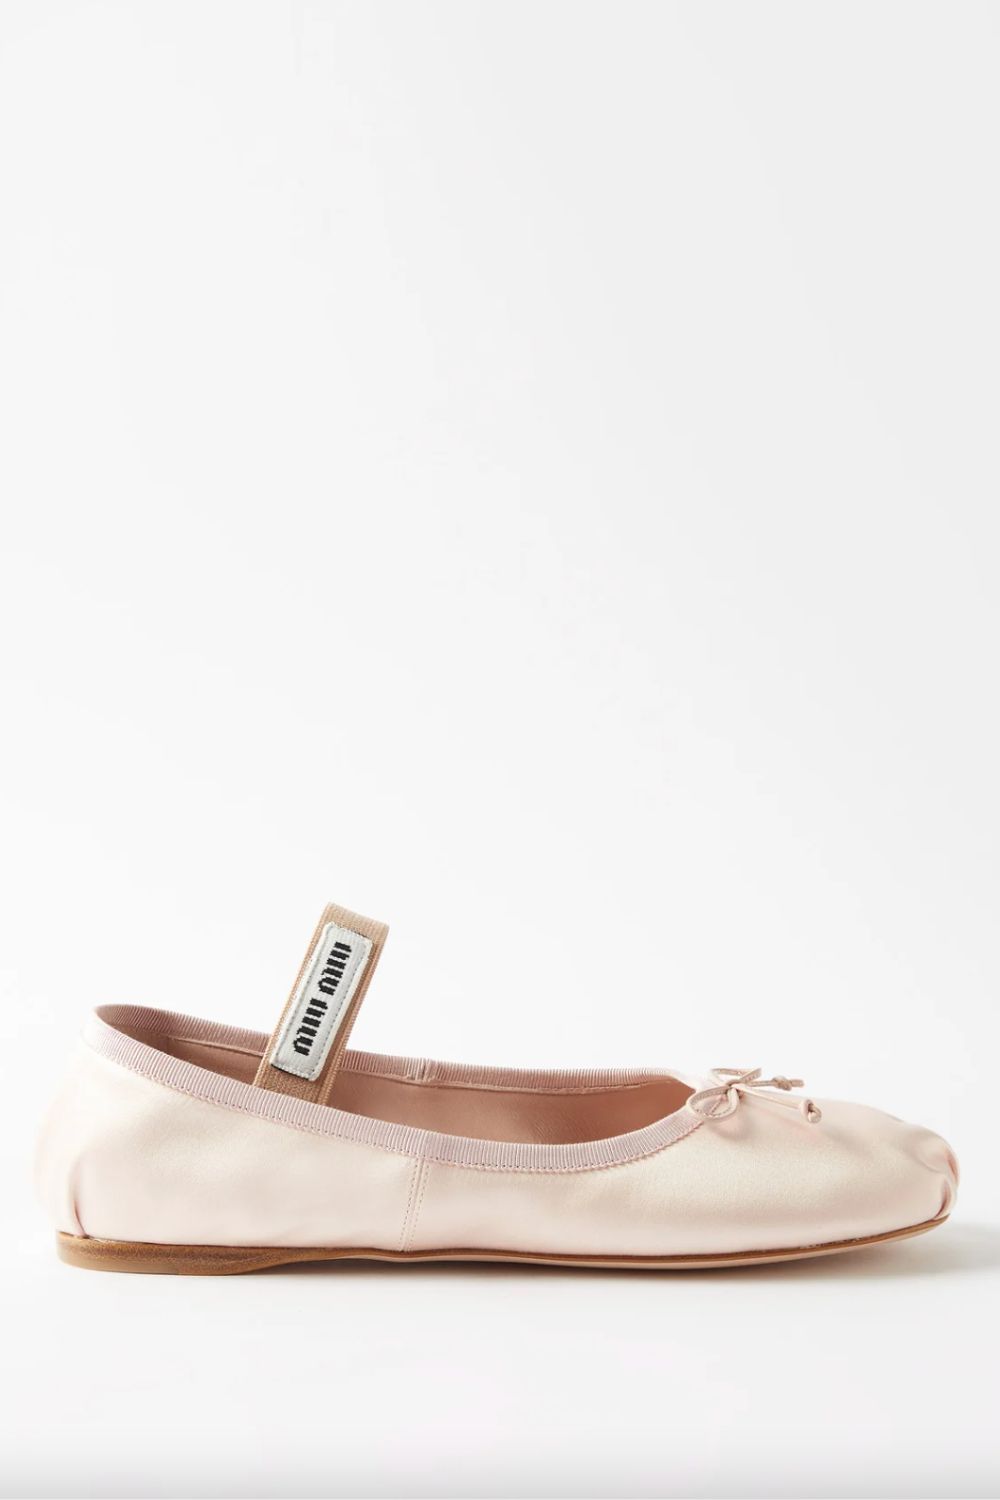 The best ballet pumps to shop this spring/summer | Marie Claire UK